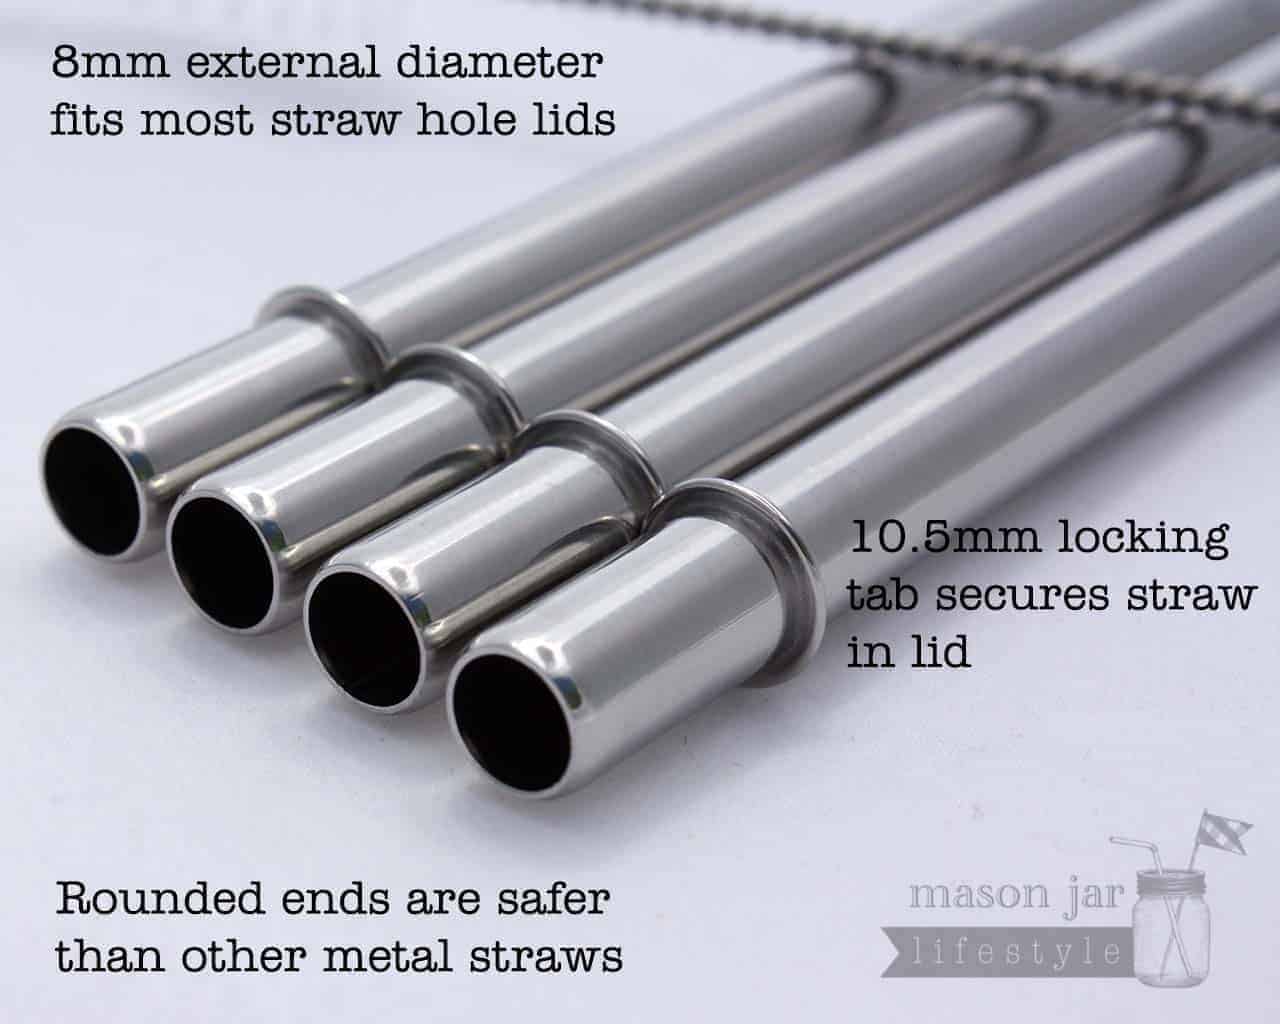 Mason Jar Lifestyle safer rounded end stainless steel straws text information graphic